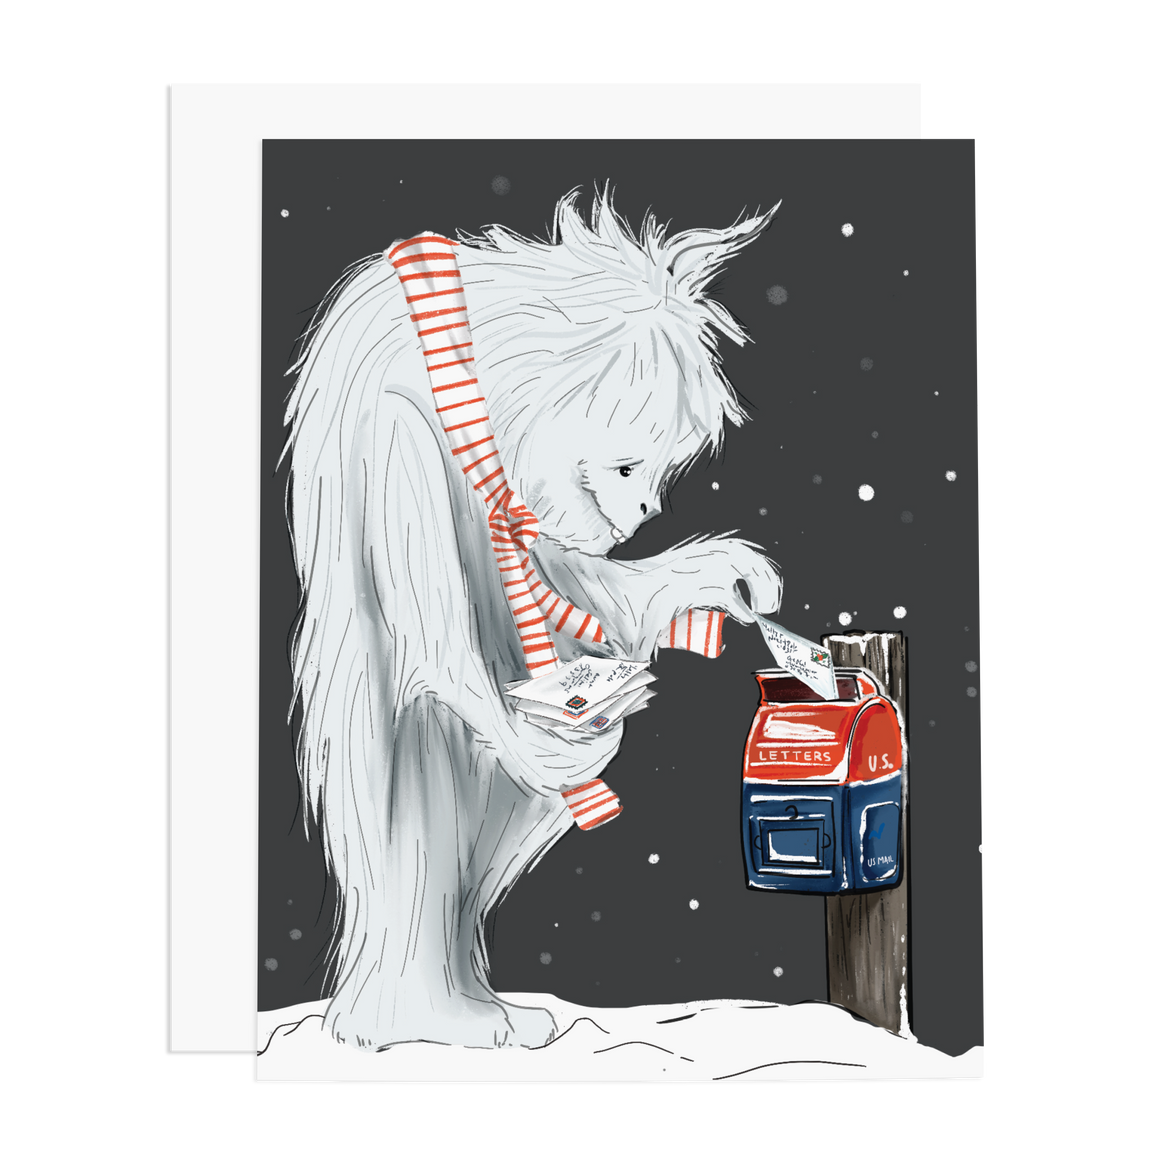 Yeti Sending Letters - Holiday Card